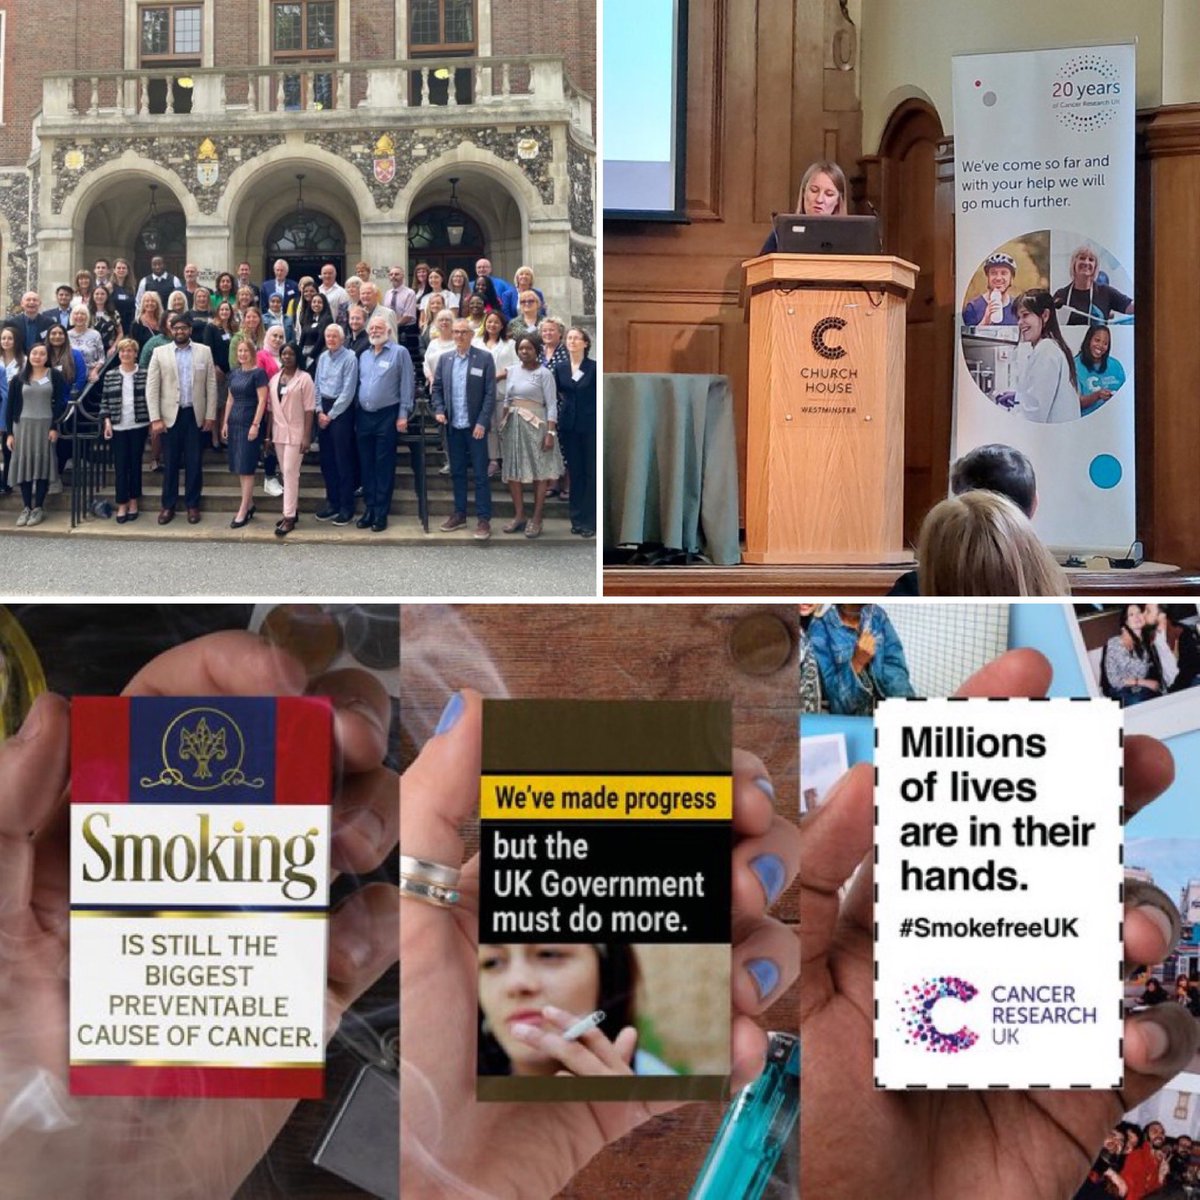 What a day for @CRUK_Policy to be at the Houses of Parliament with some of @CR_UK’s amazing volunteer campaigners for the launch of our new #SmokefreeUK campaign – another step in our long history of working to stop the death and disease caused by tobacco.